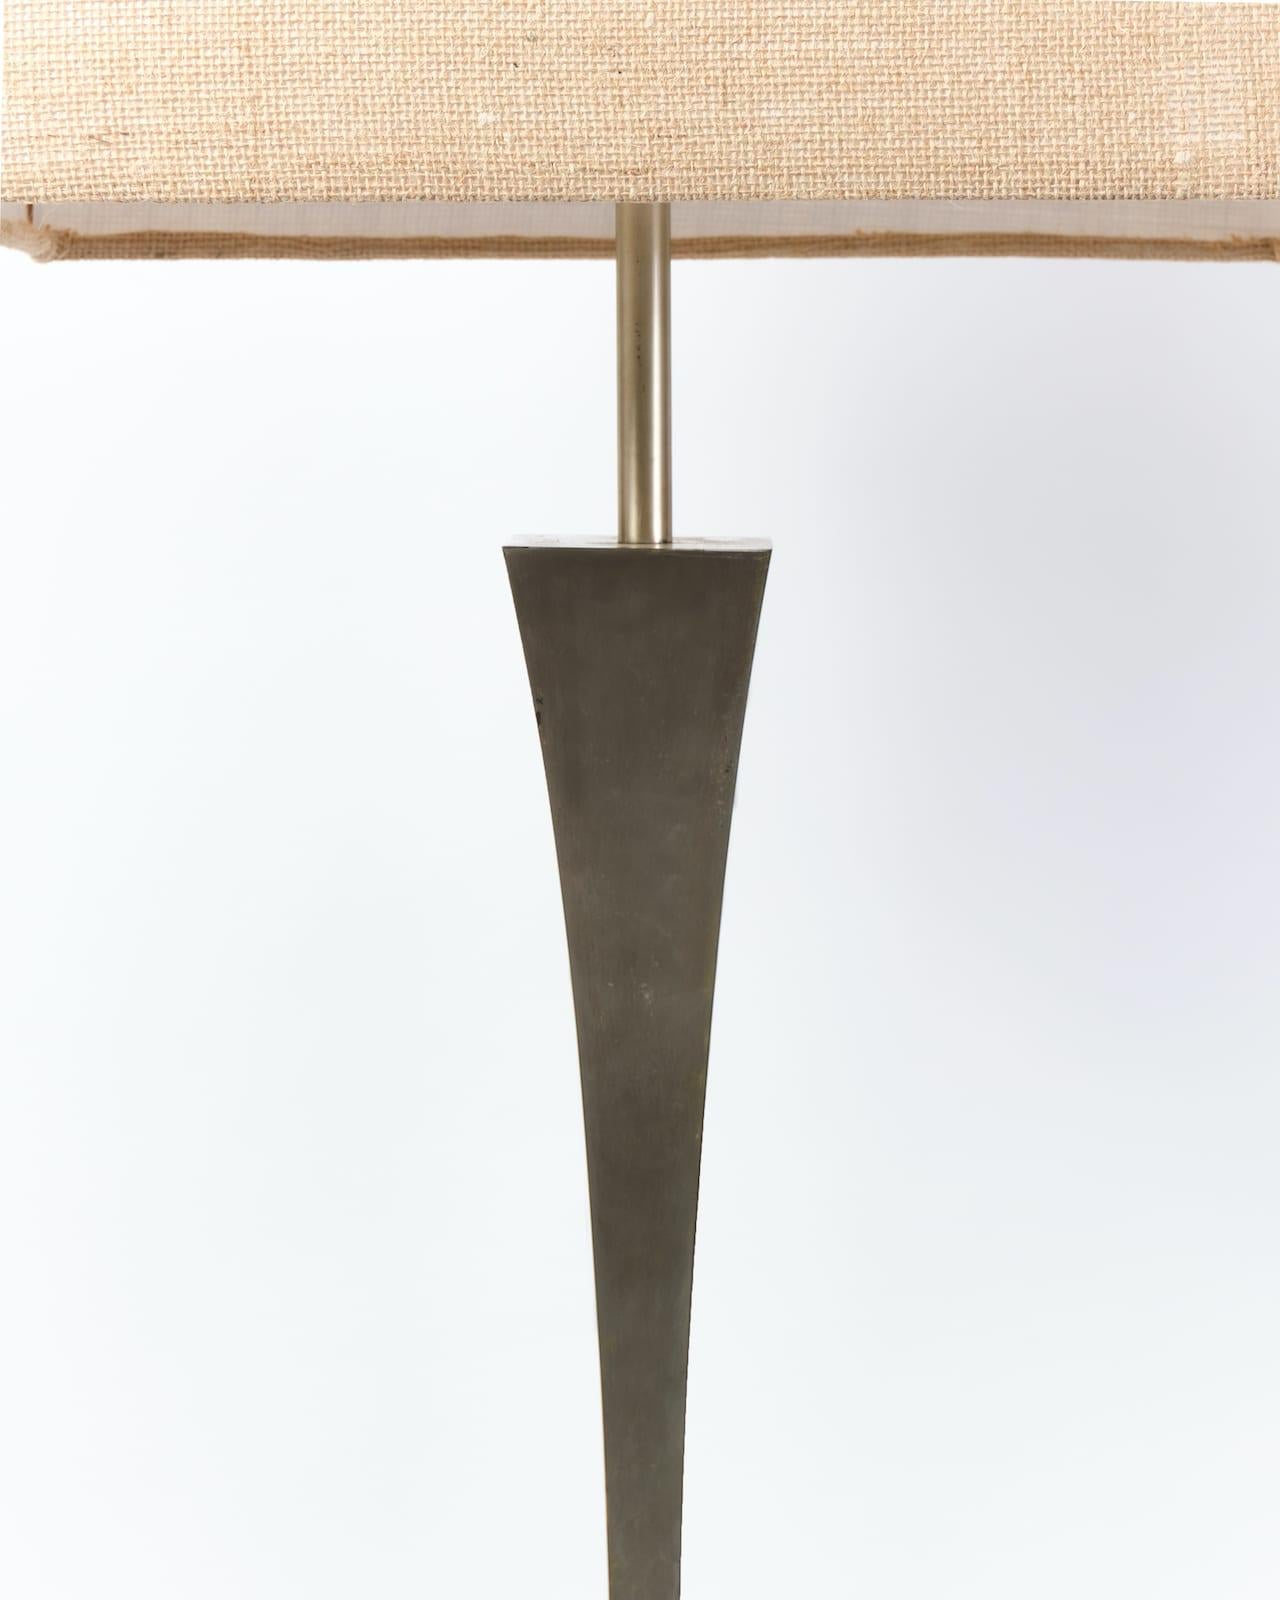 Tonello and Montagna Grillo Model 'Piramide' floor lamp

New square hessian shade (included in lamp height) H46 x D46 cm
Sheet aluminium, tubular metal, chrome. 

Dimensions: H179 x D21 cm.